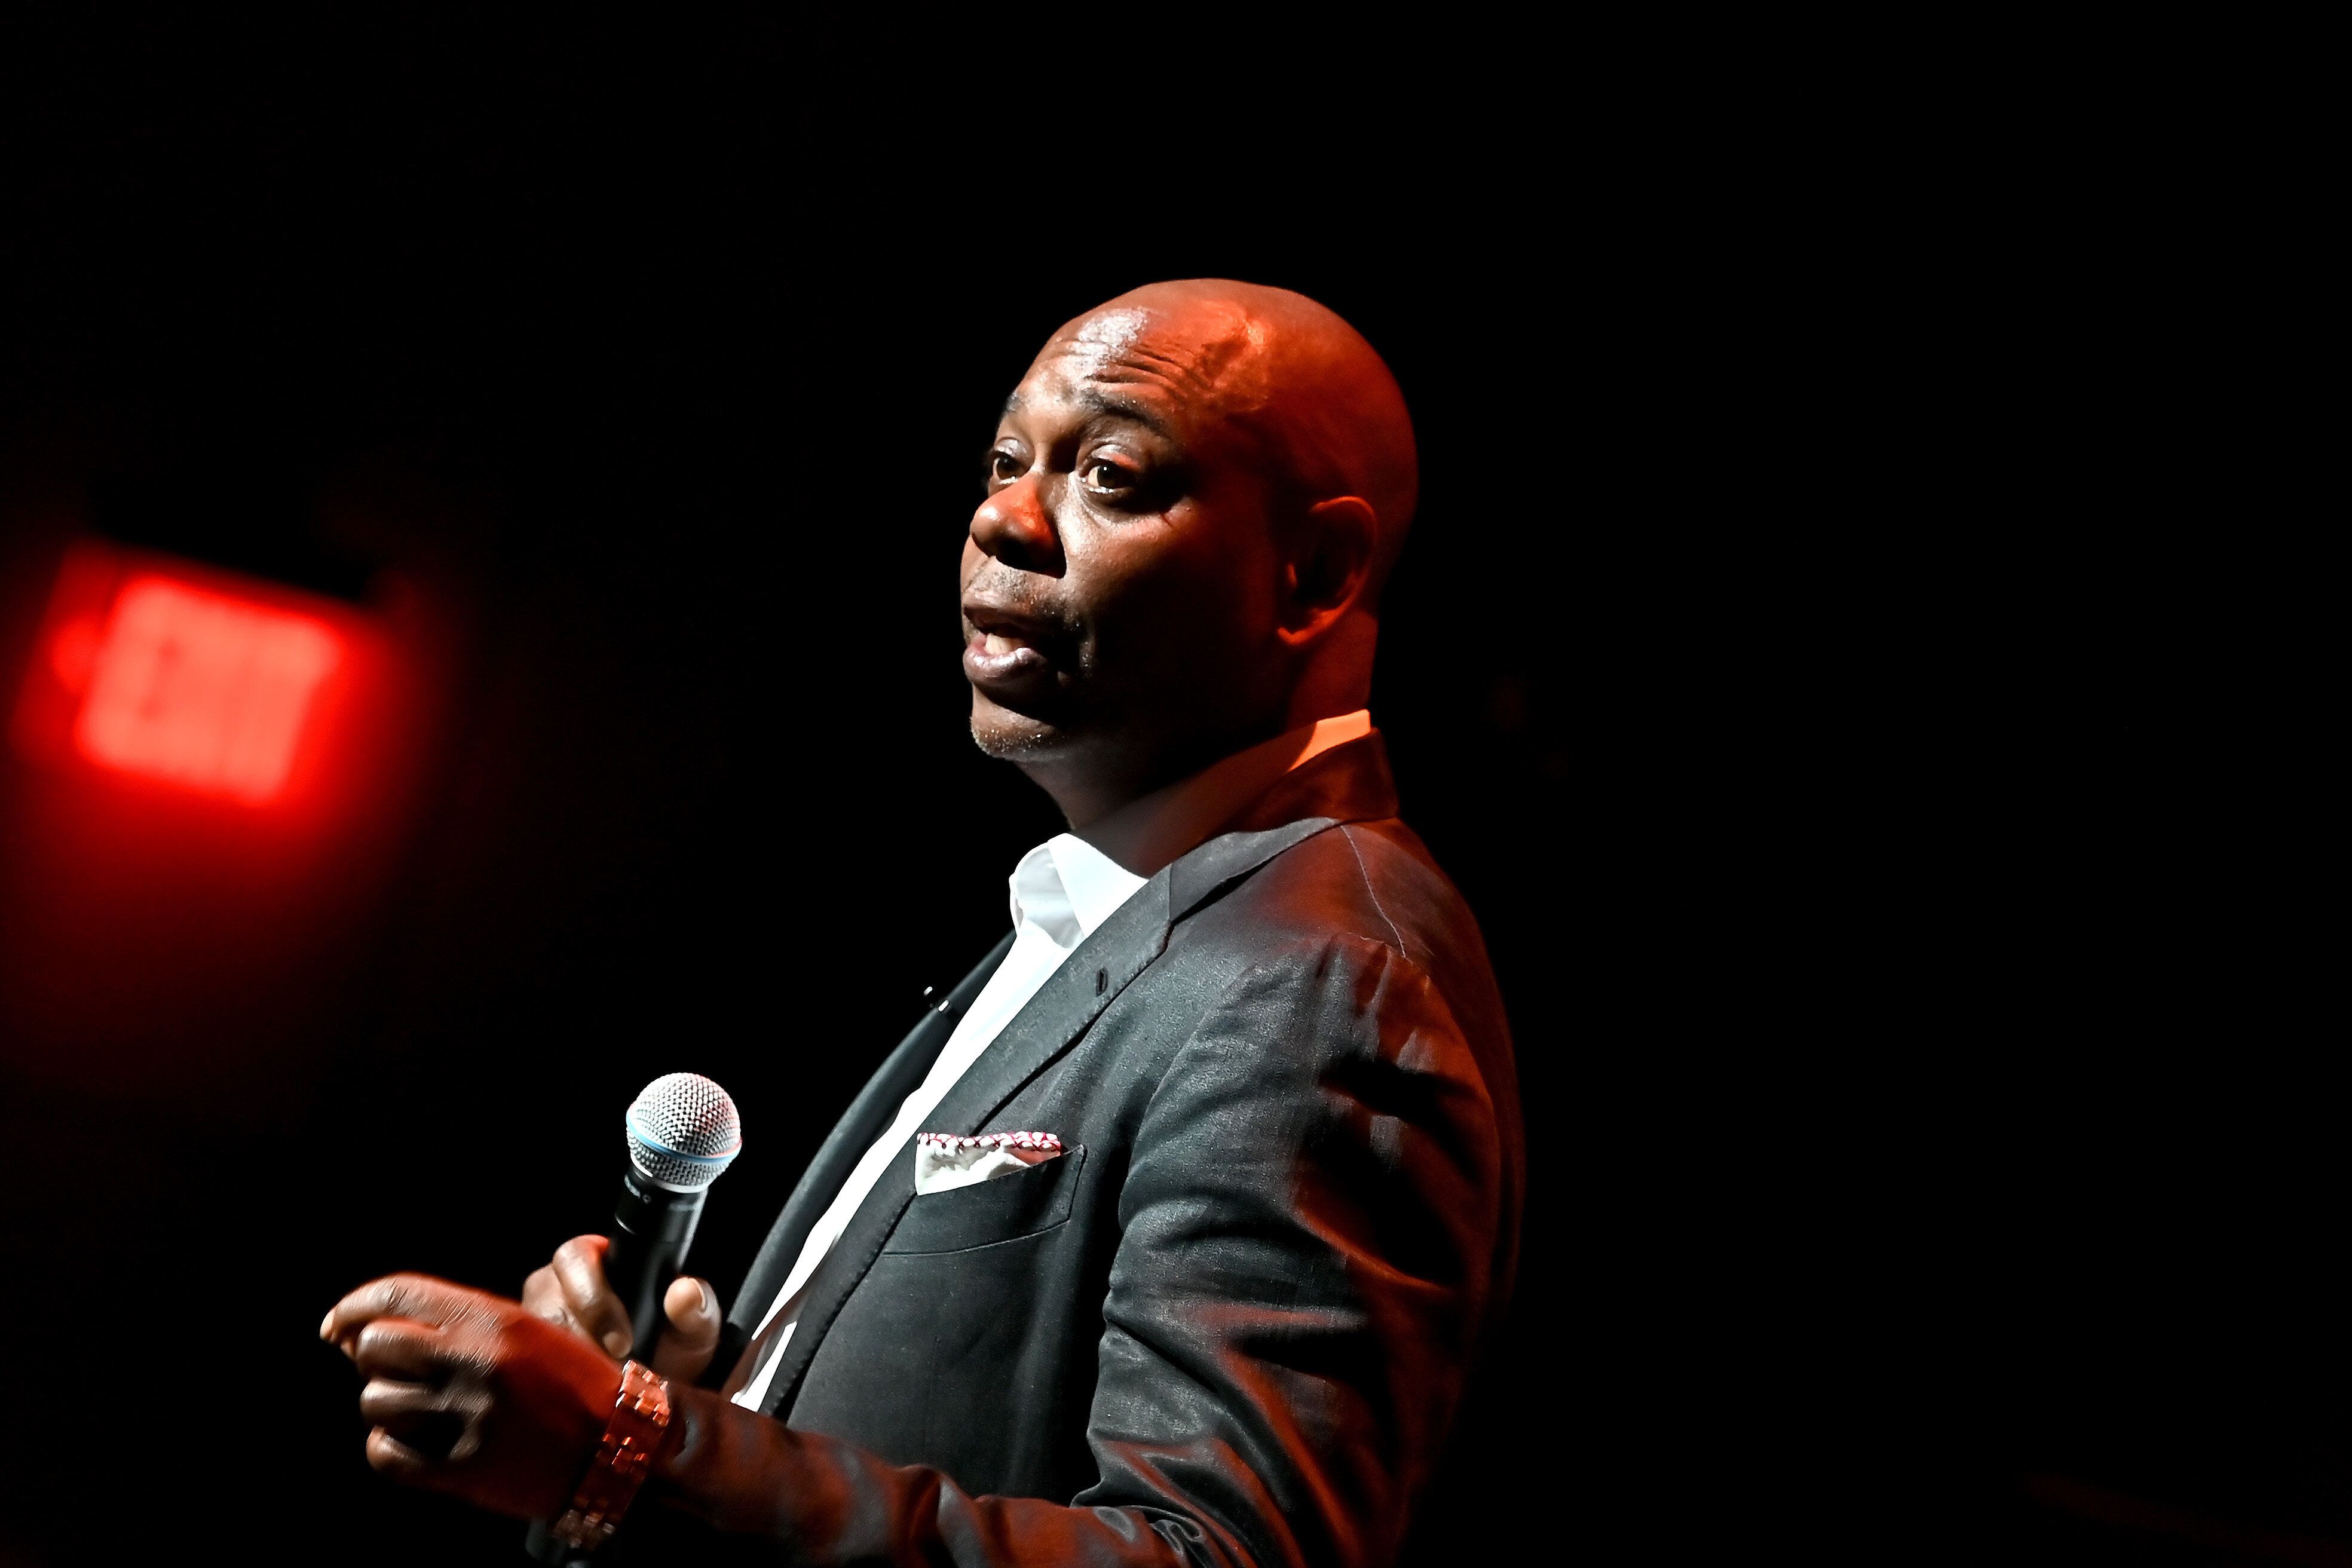 Dave Chappelle performs onstage during the Dave Chappelle theatre dedication ceremony at Duke Ellington School of the Arts on June 20, 2022, in Washington, D.C.